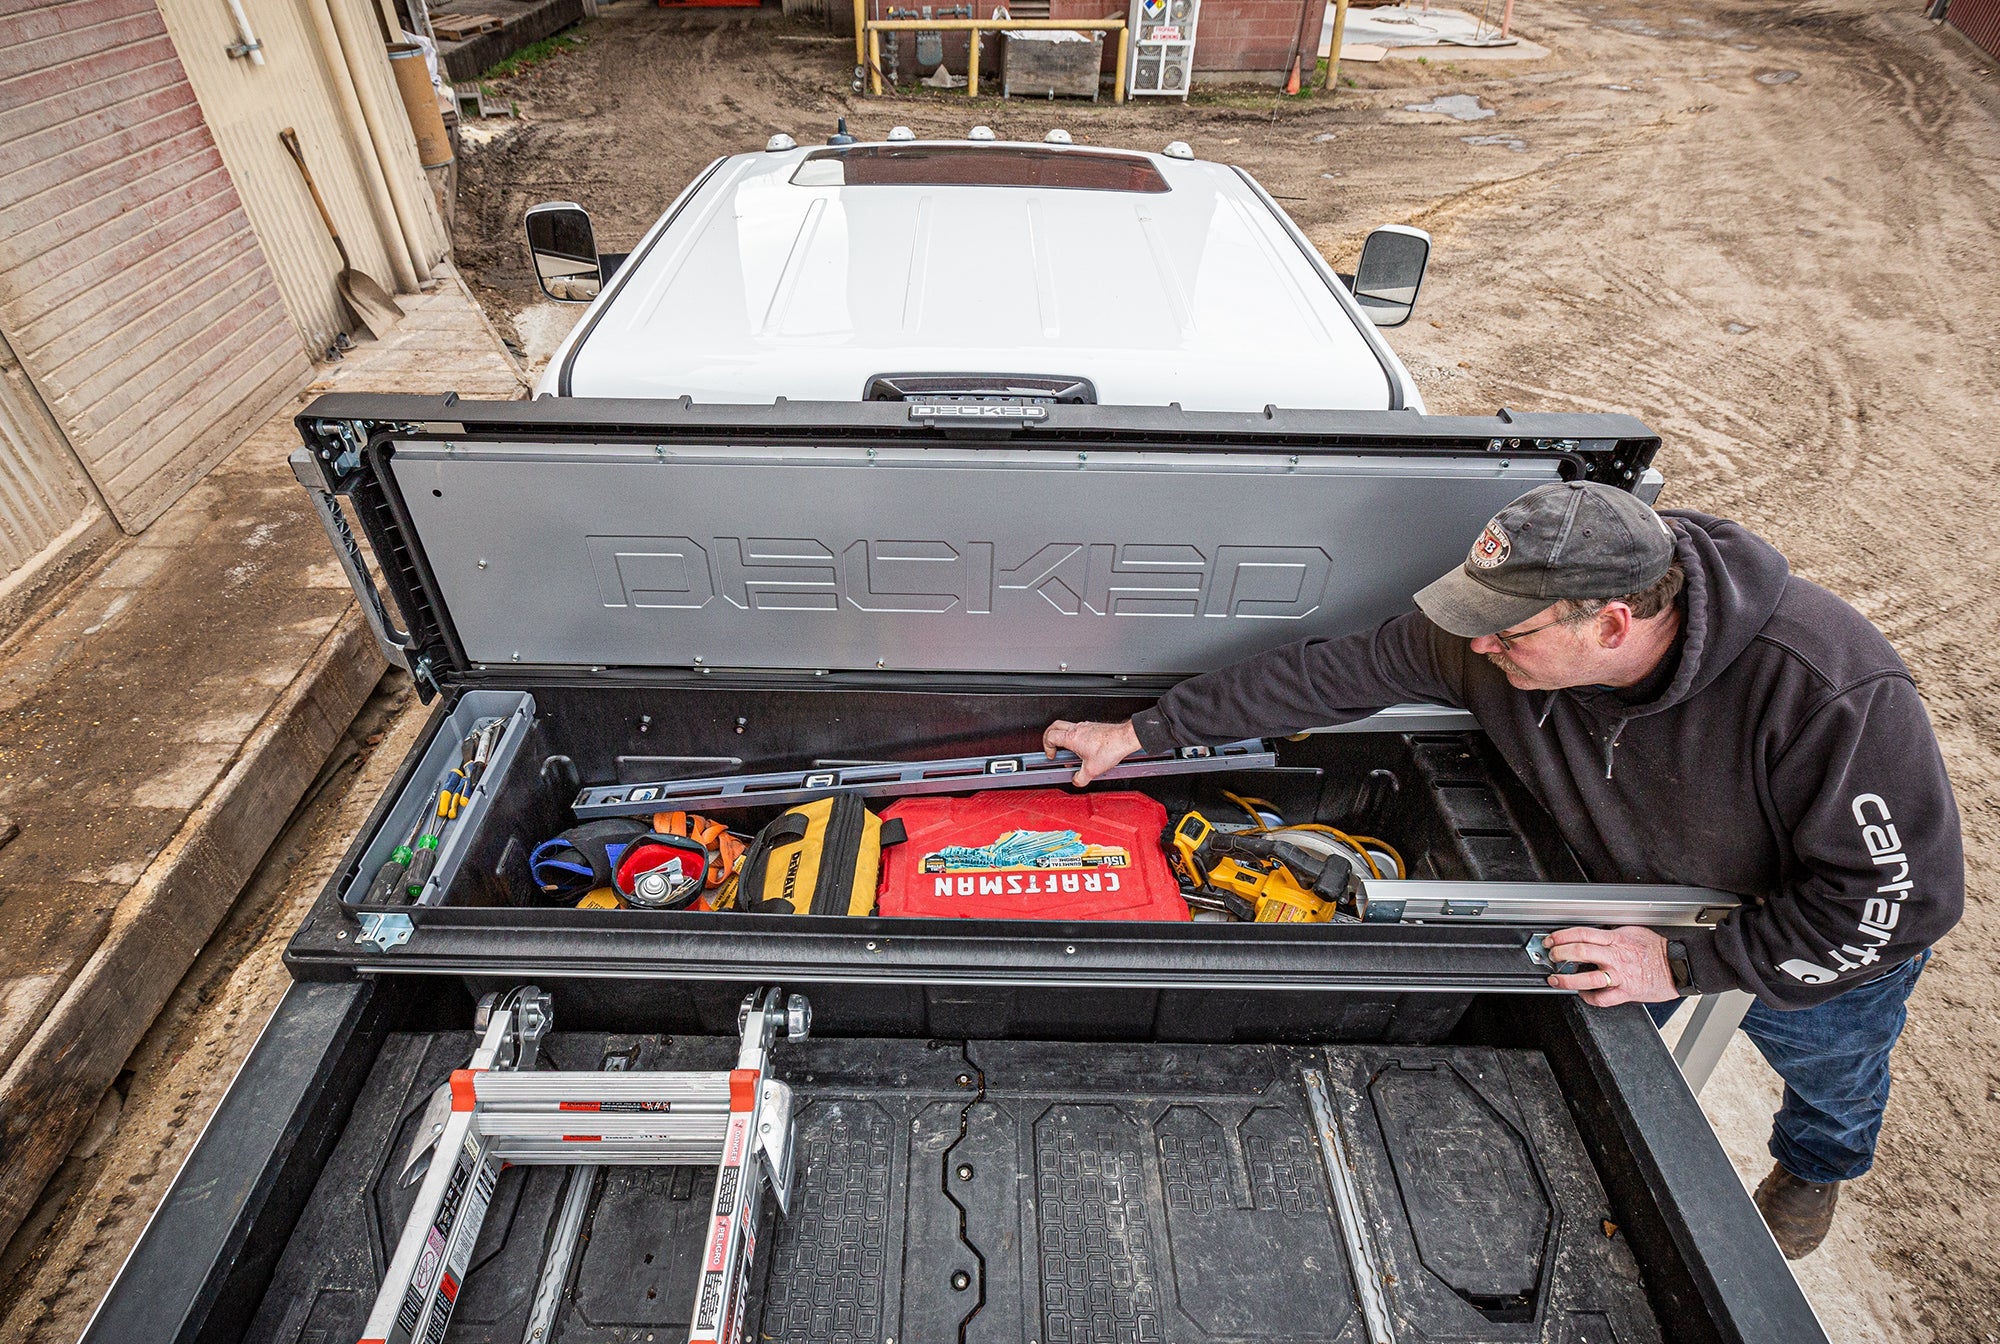 Truck Tool Box By Decked display